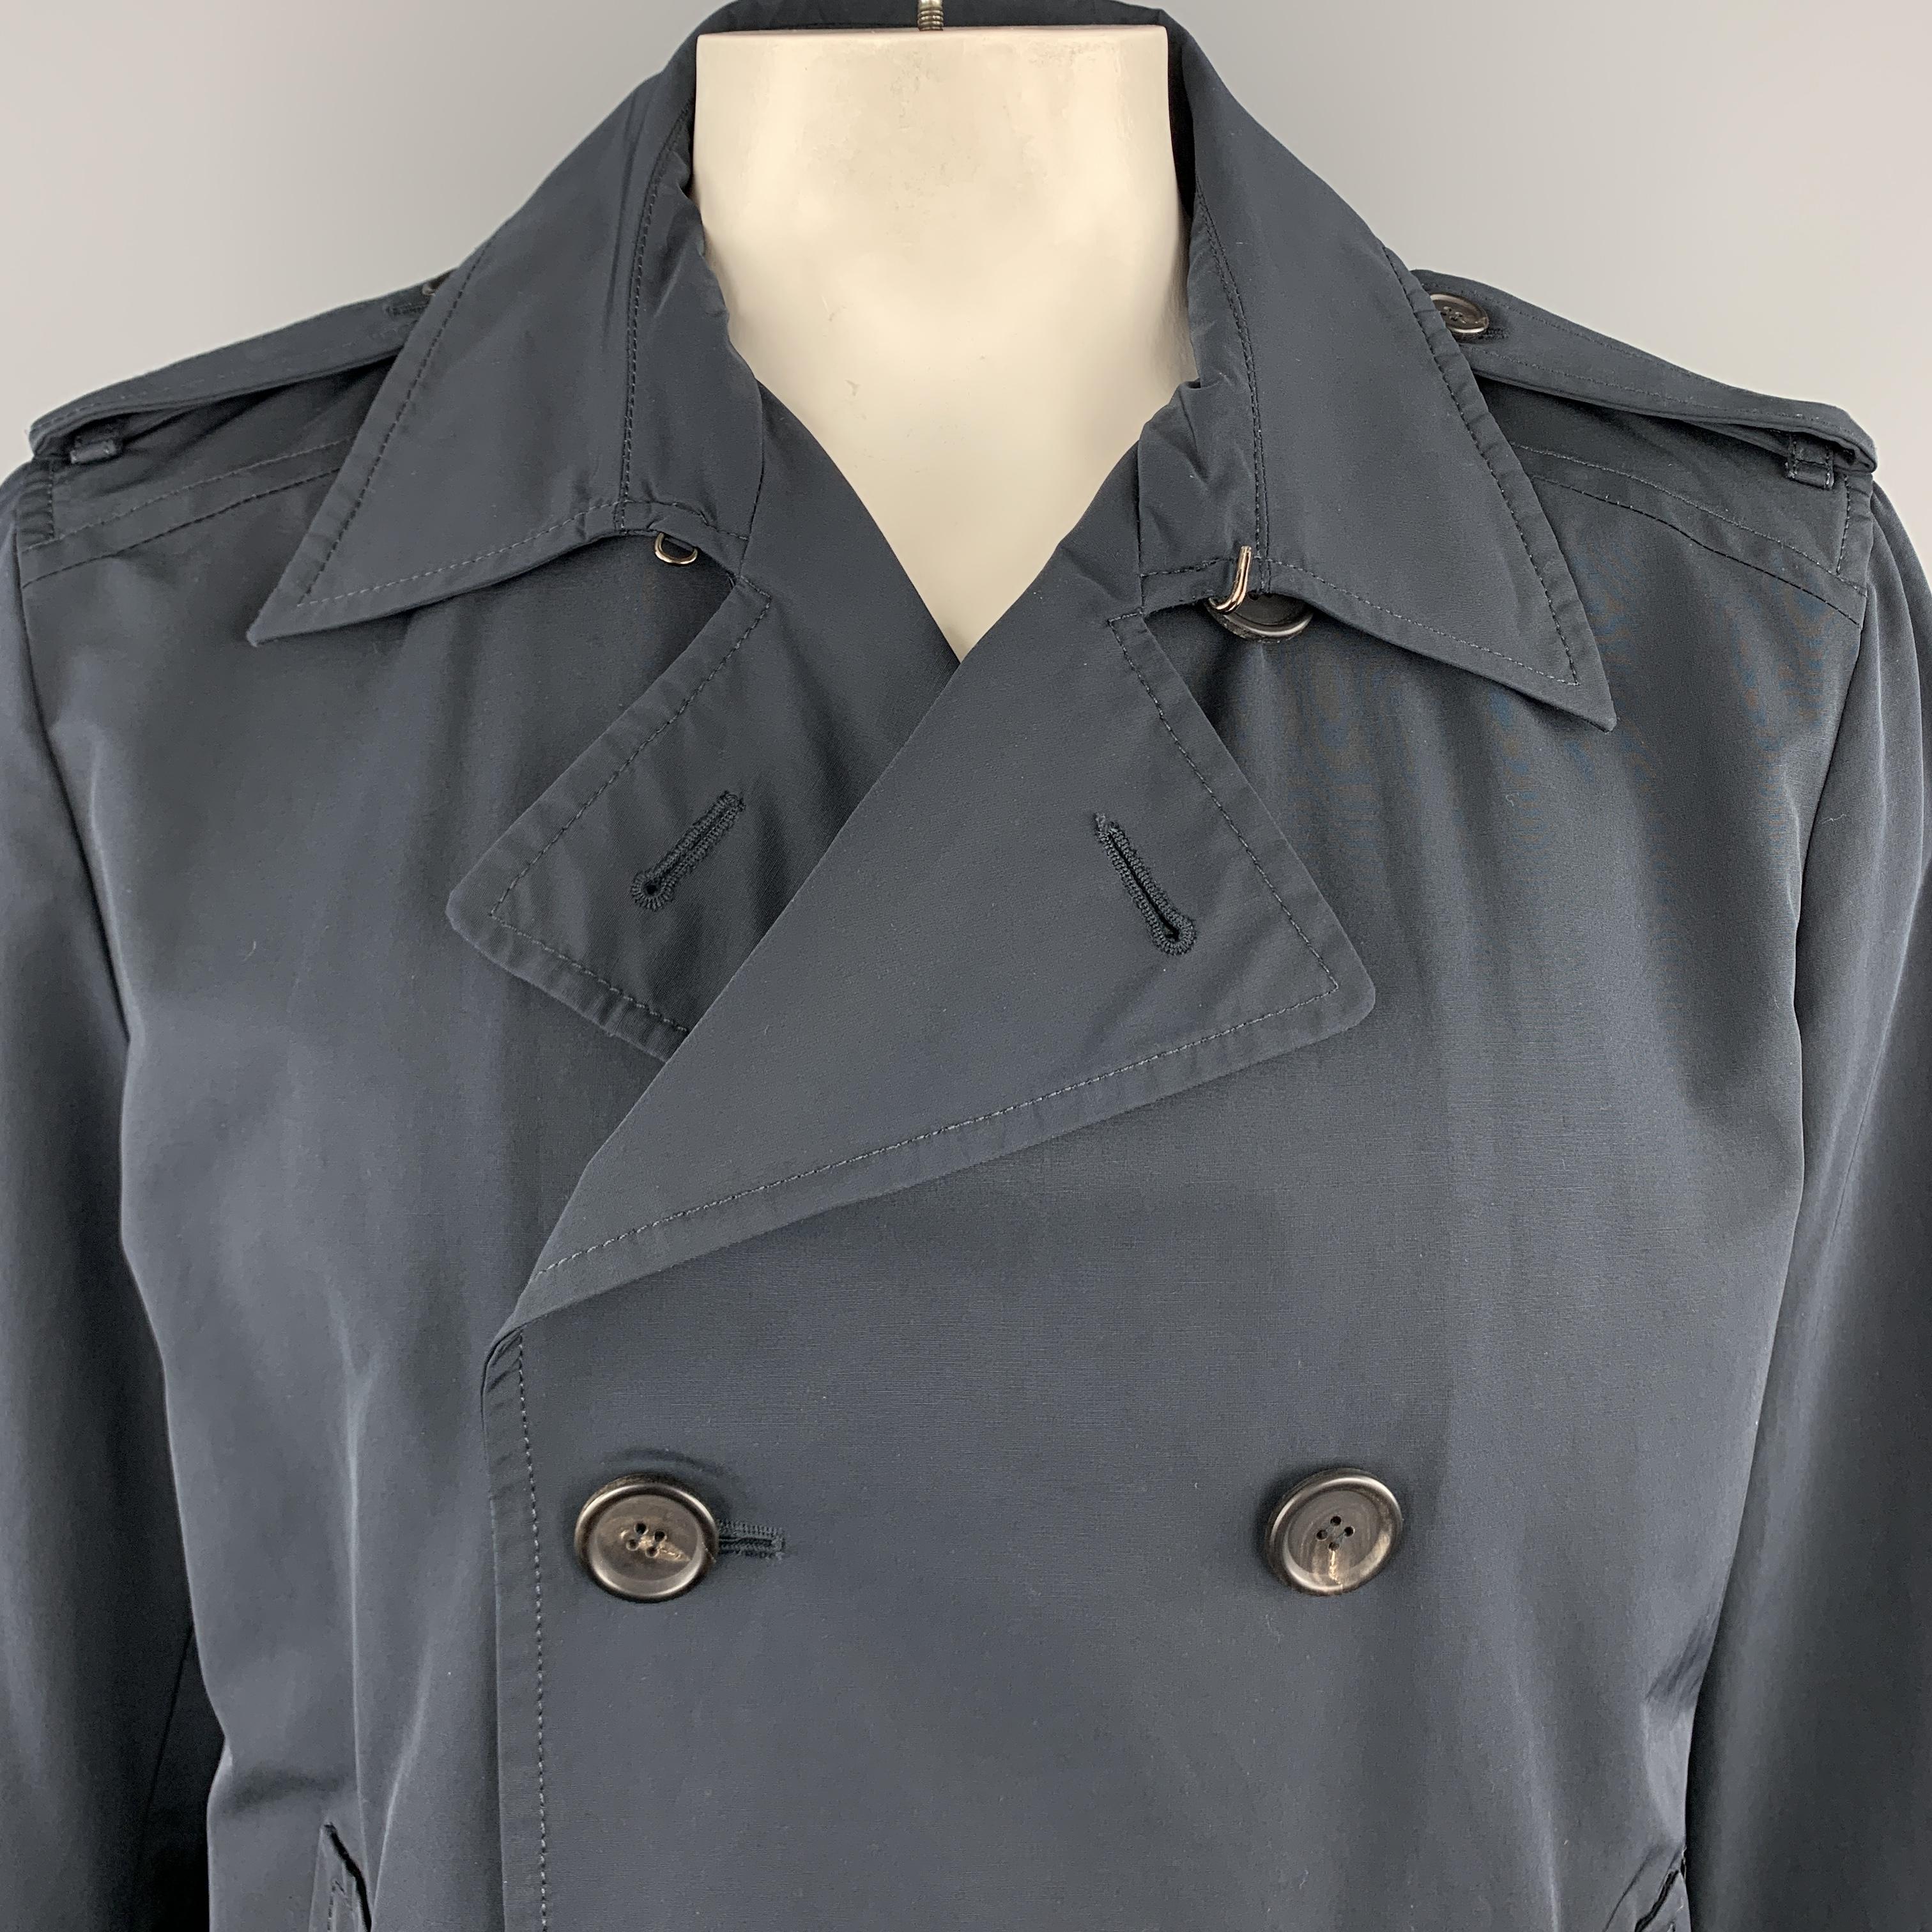 PRADA pea coat comes in muted navy blue cotton blend fabric with a double breasted button front, slanted pockets, epaulets, and half liner. Made in Italy.

Very Good Pre-Owned Condition.
Marked: IT 56

Measurements:

Shoulder: 17 in.
Chest: 48